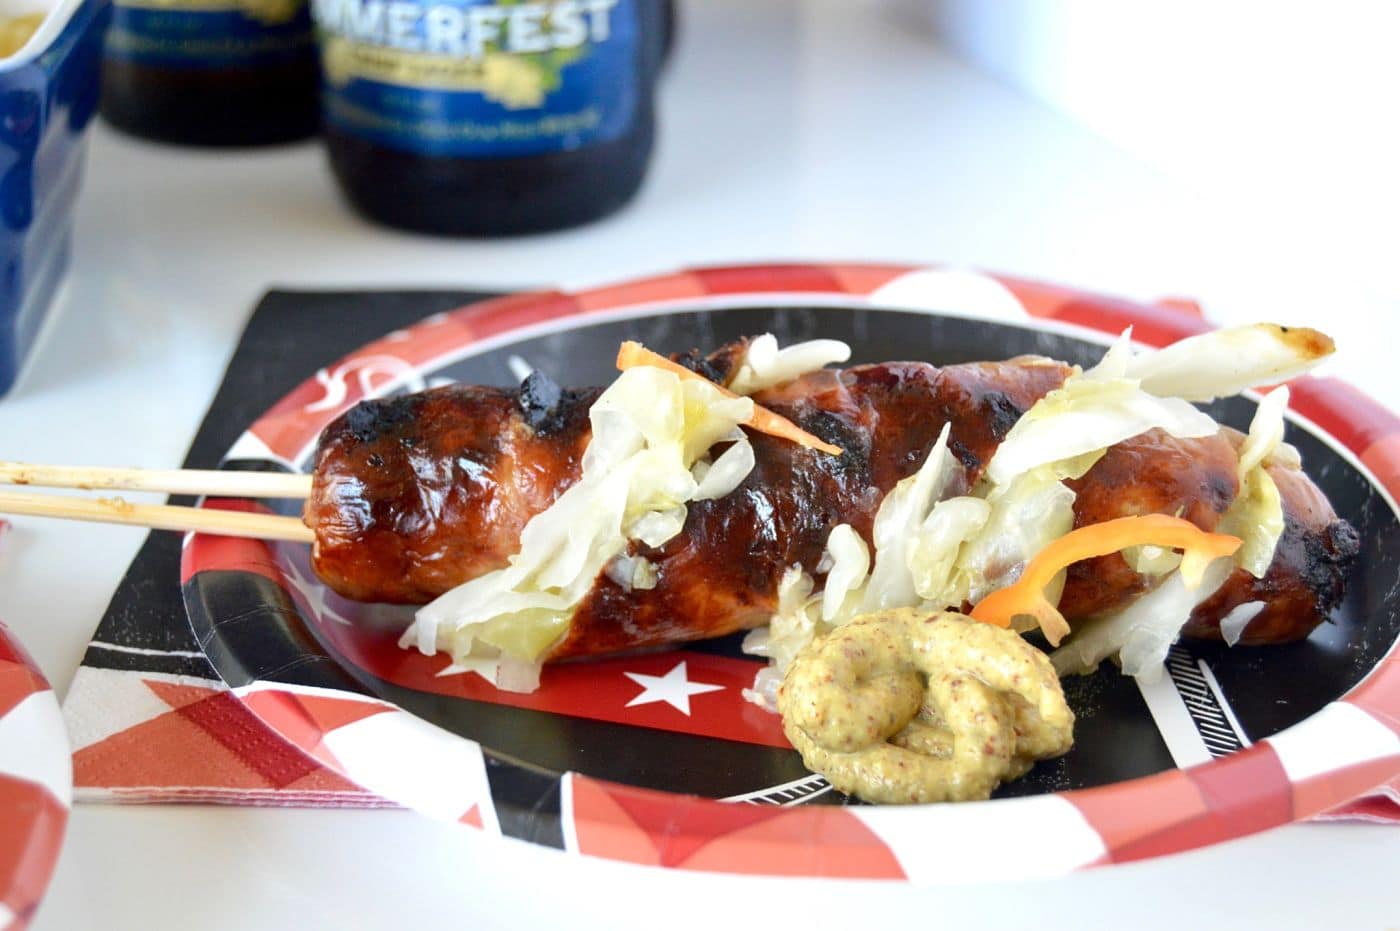 Perfect for Tailgating, these Grilled Sauerkraut Stuffed Brats on a Stick have the Kraut tucked right in! Serve then on the stick for the no carb eaters at your football game!